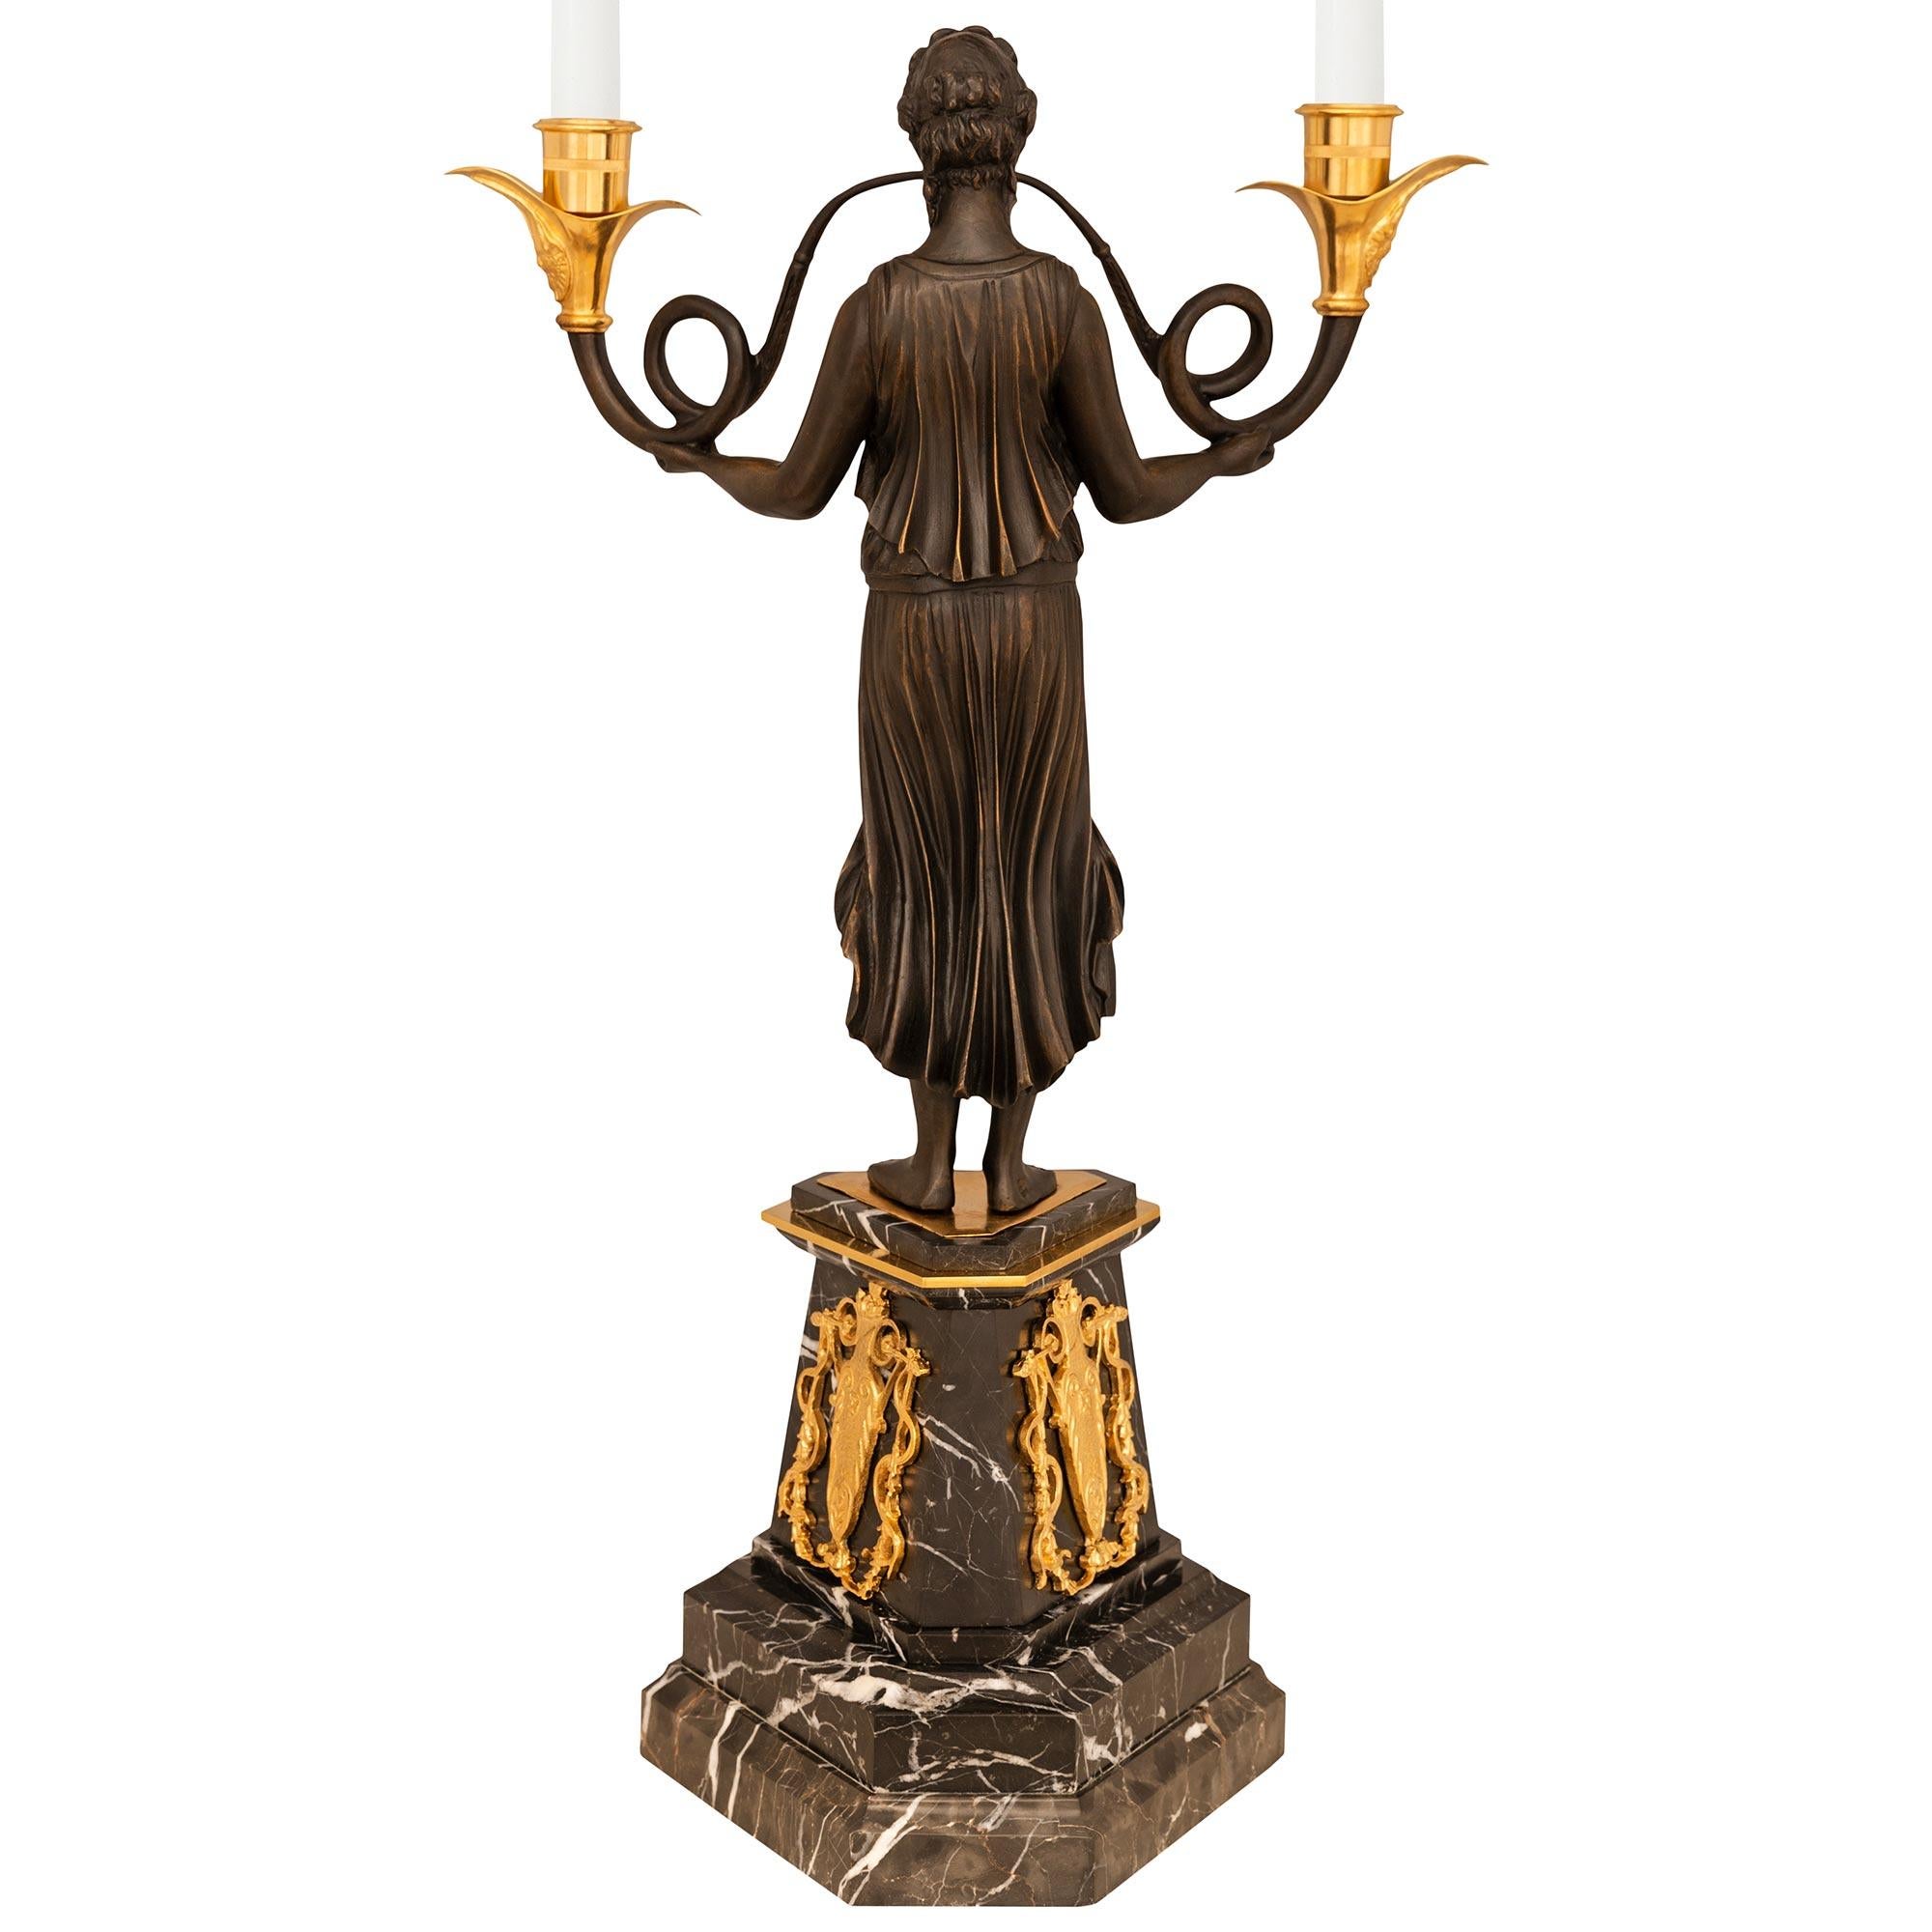 Pair Of French 19th Century Neoclassical St. Bronze, Ormolu & Marble Candelabras For Sale 5